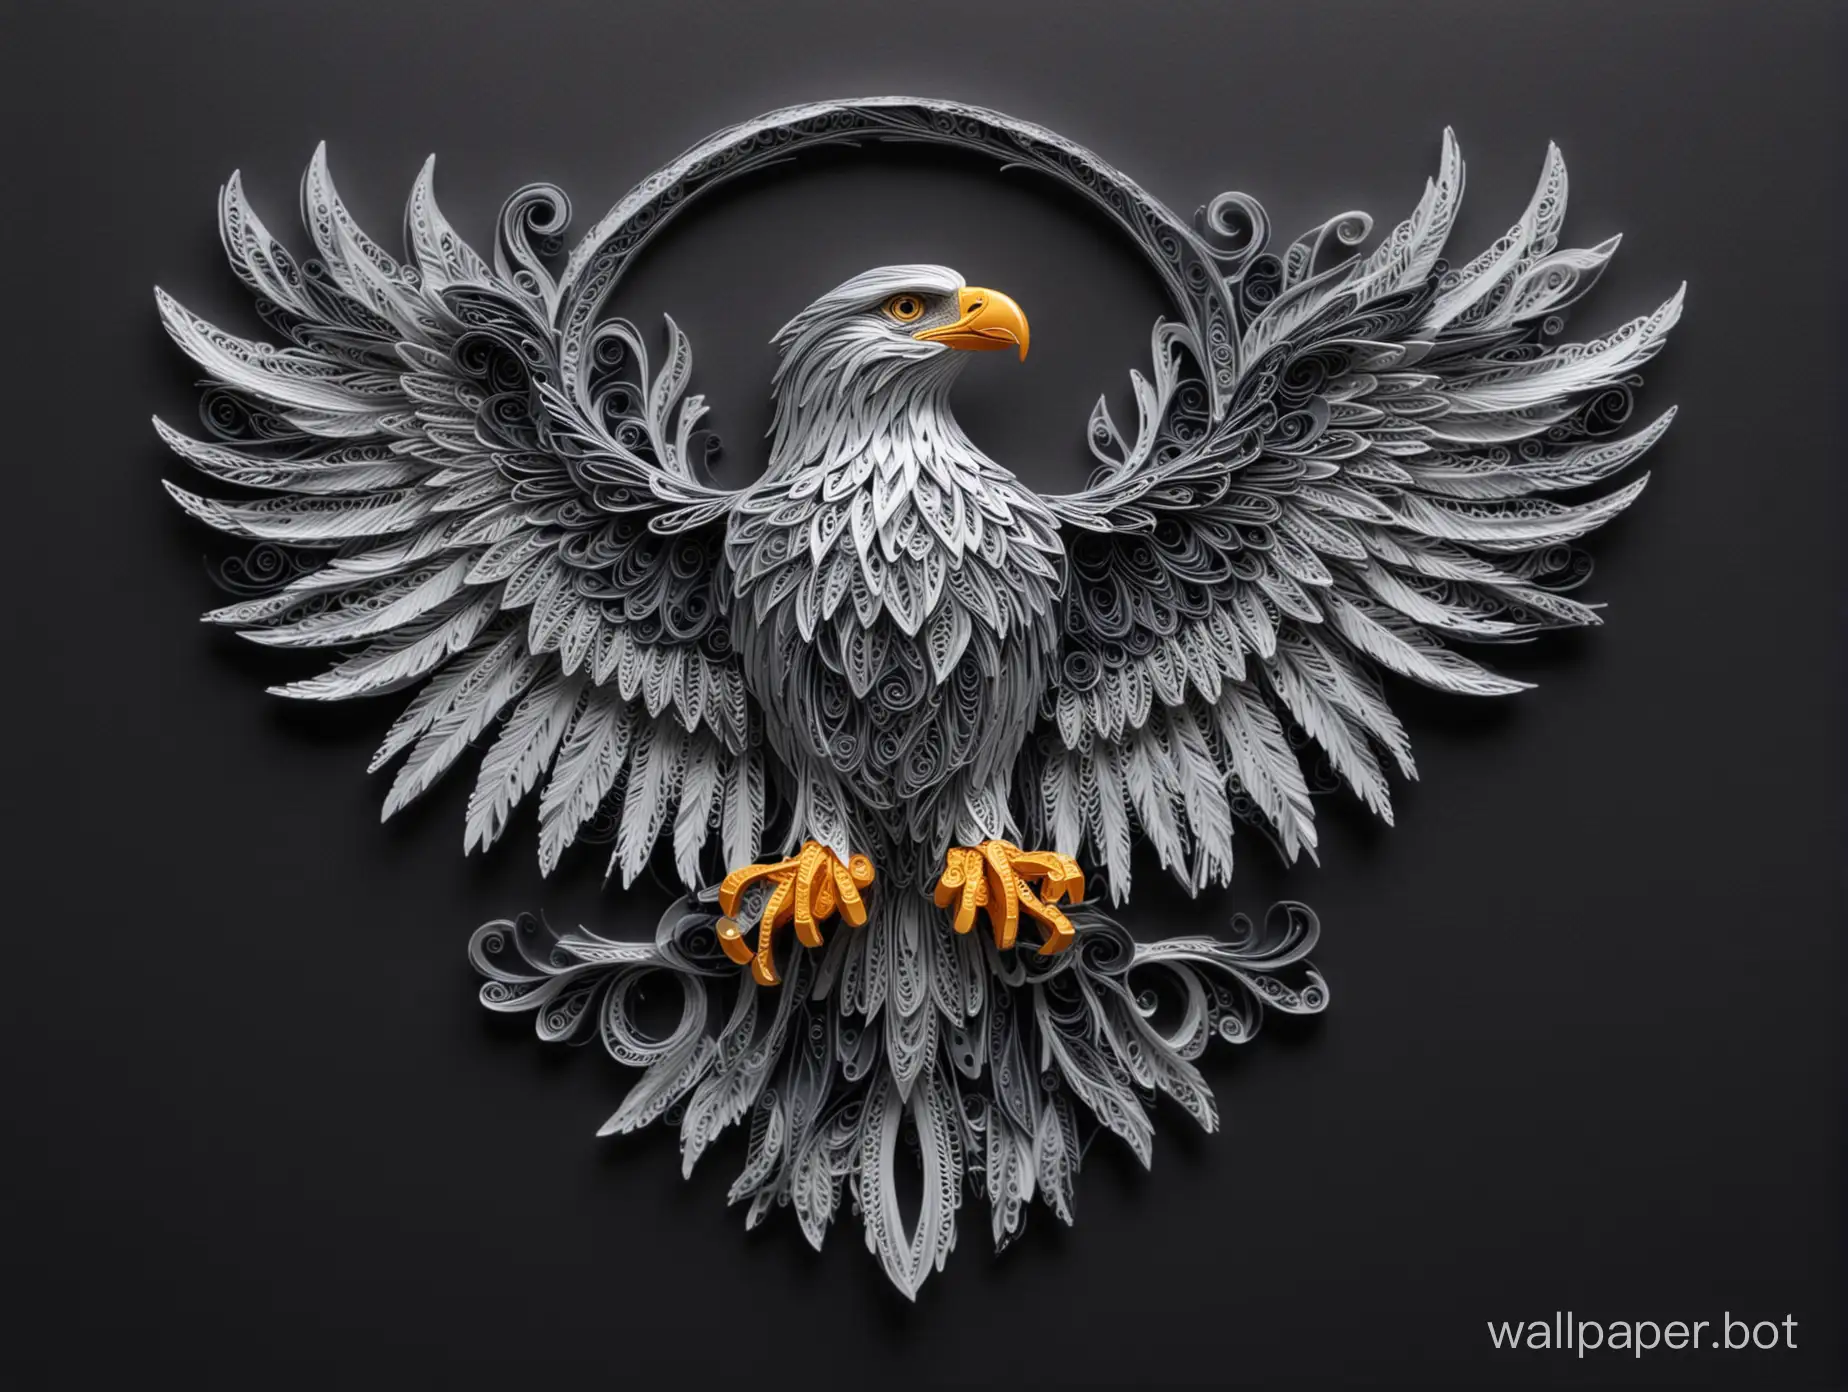 front-angle view of a silver eagle with silver grey decorative flames in a papercraft quilling style. Simple composition with a dark background.